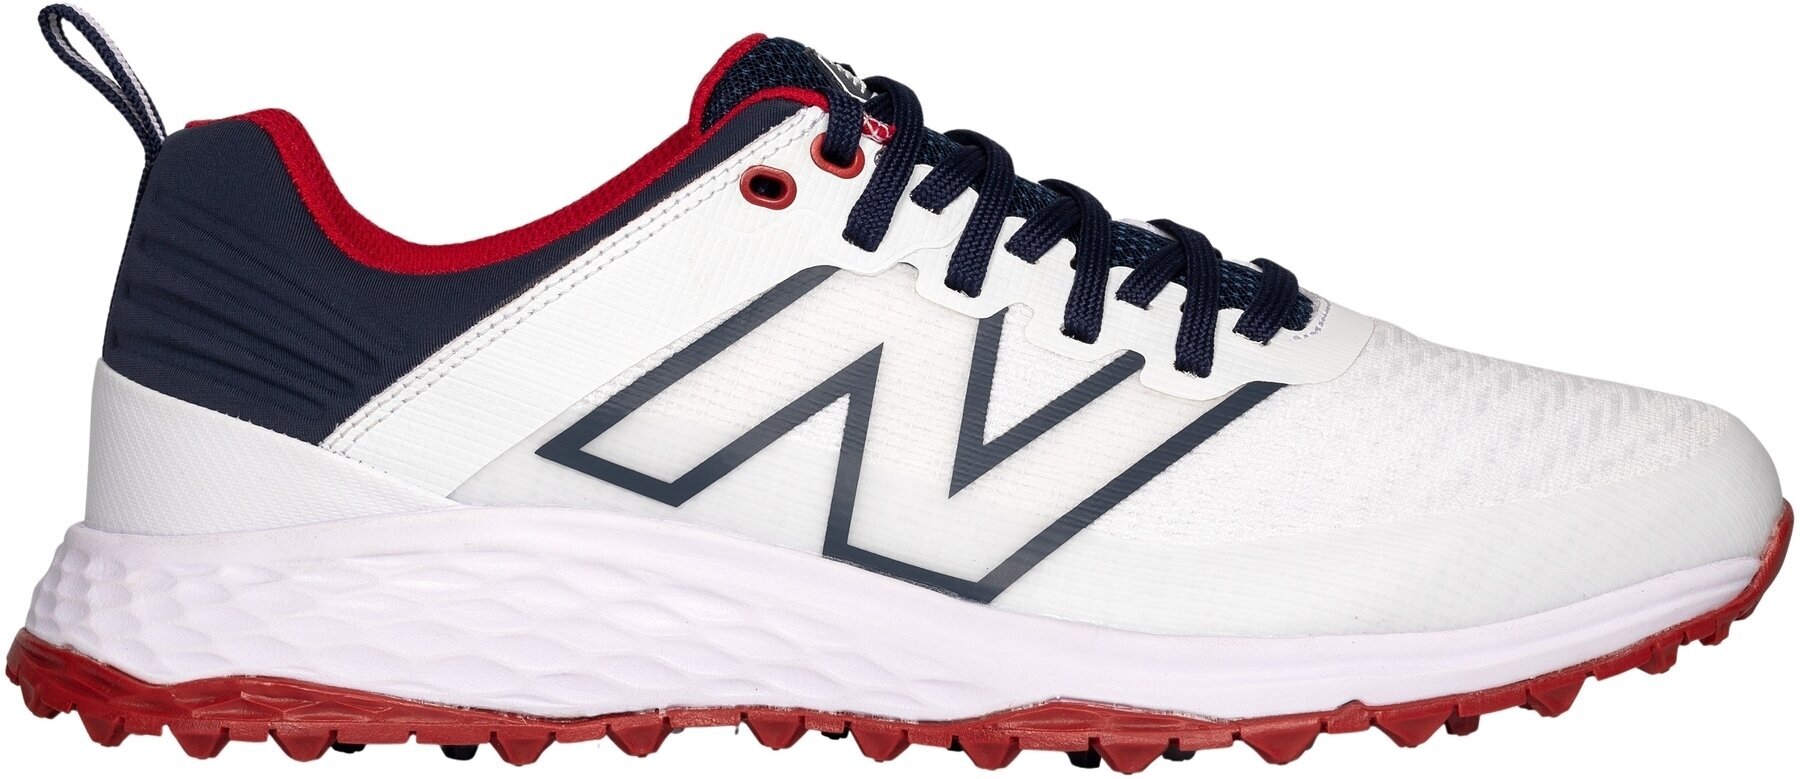 Men's golf shoes New Balance Contend Mens Golf Shoes White/Navy 40,5